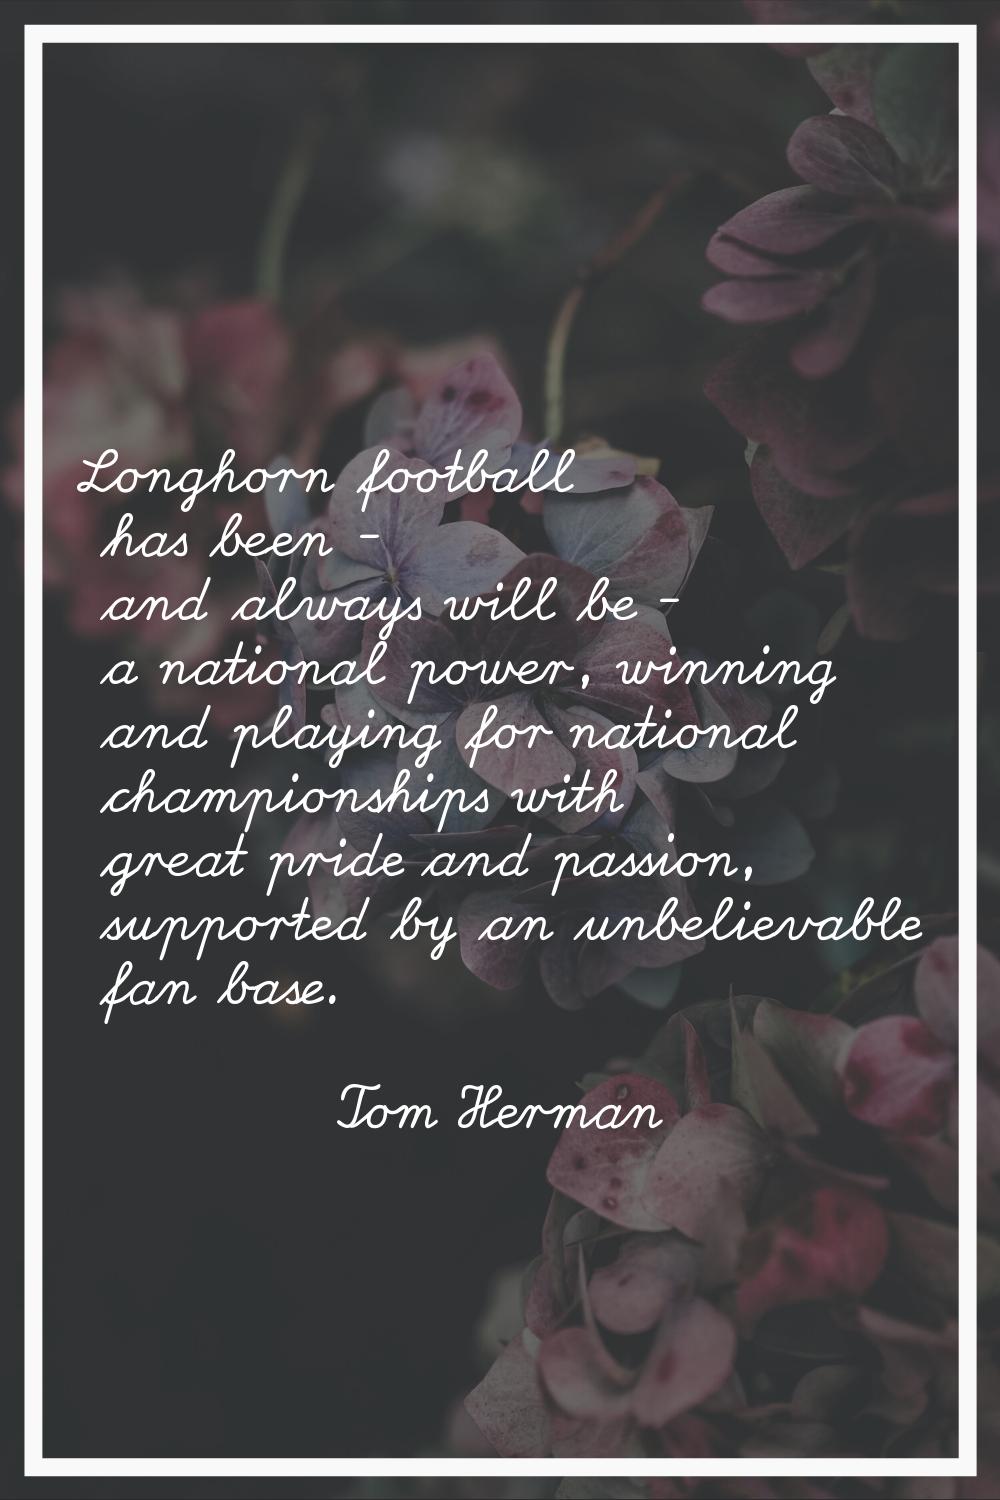 Longhorn football has been - and always will be - a national power, winning and playing for nationa